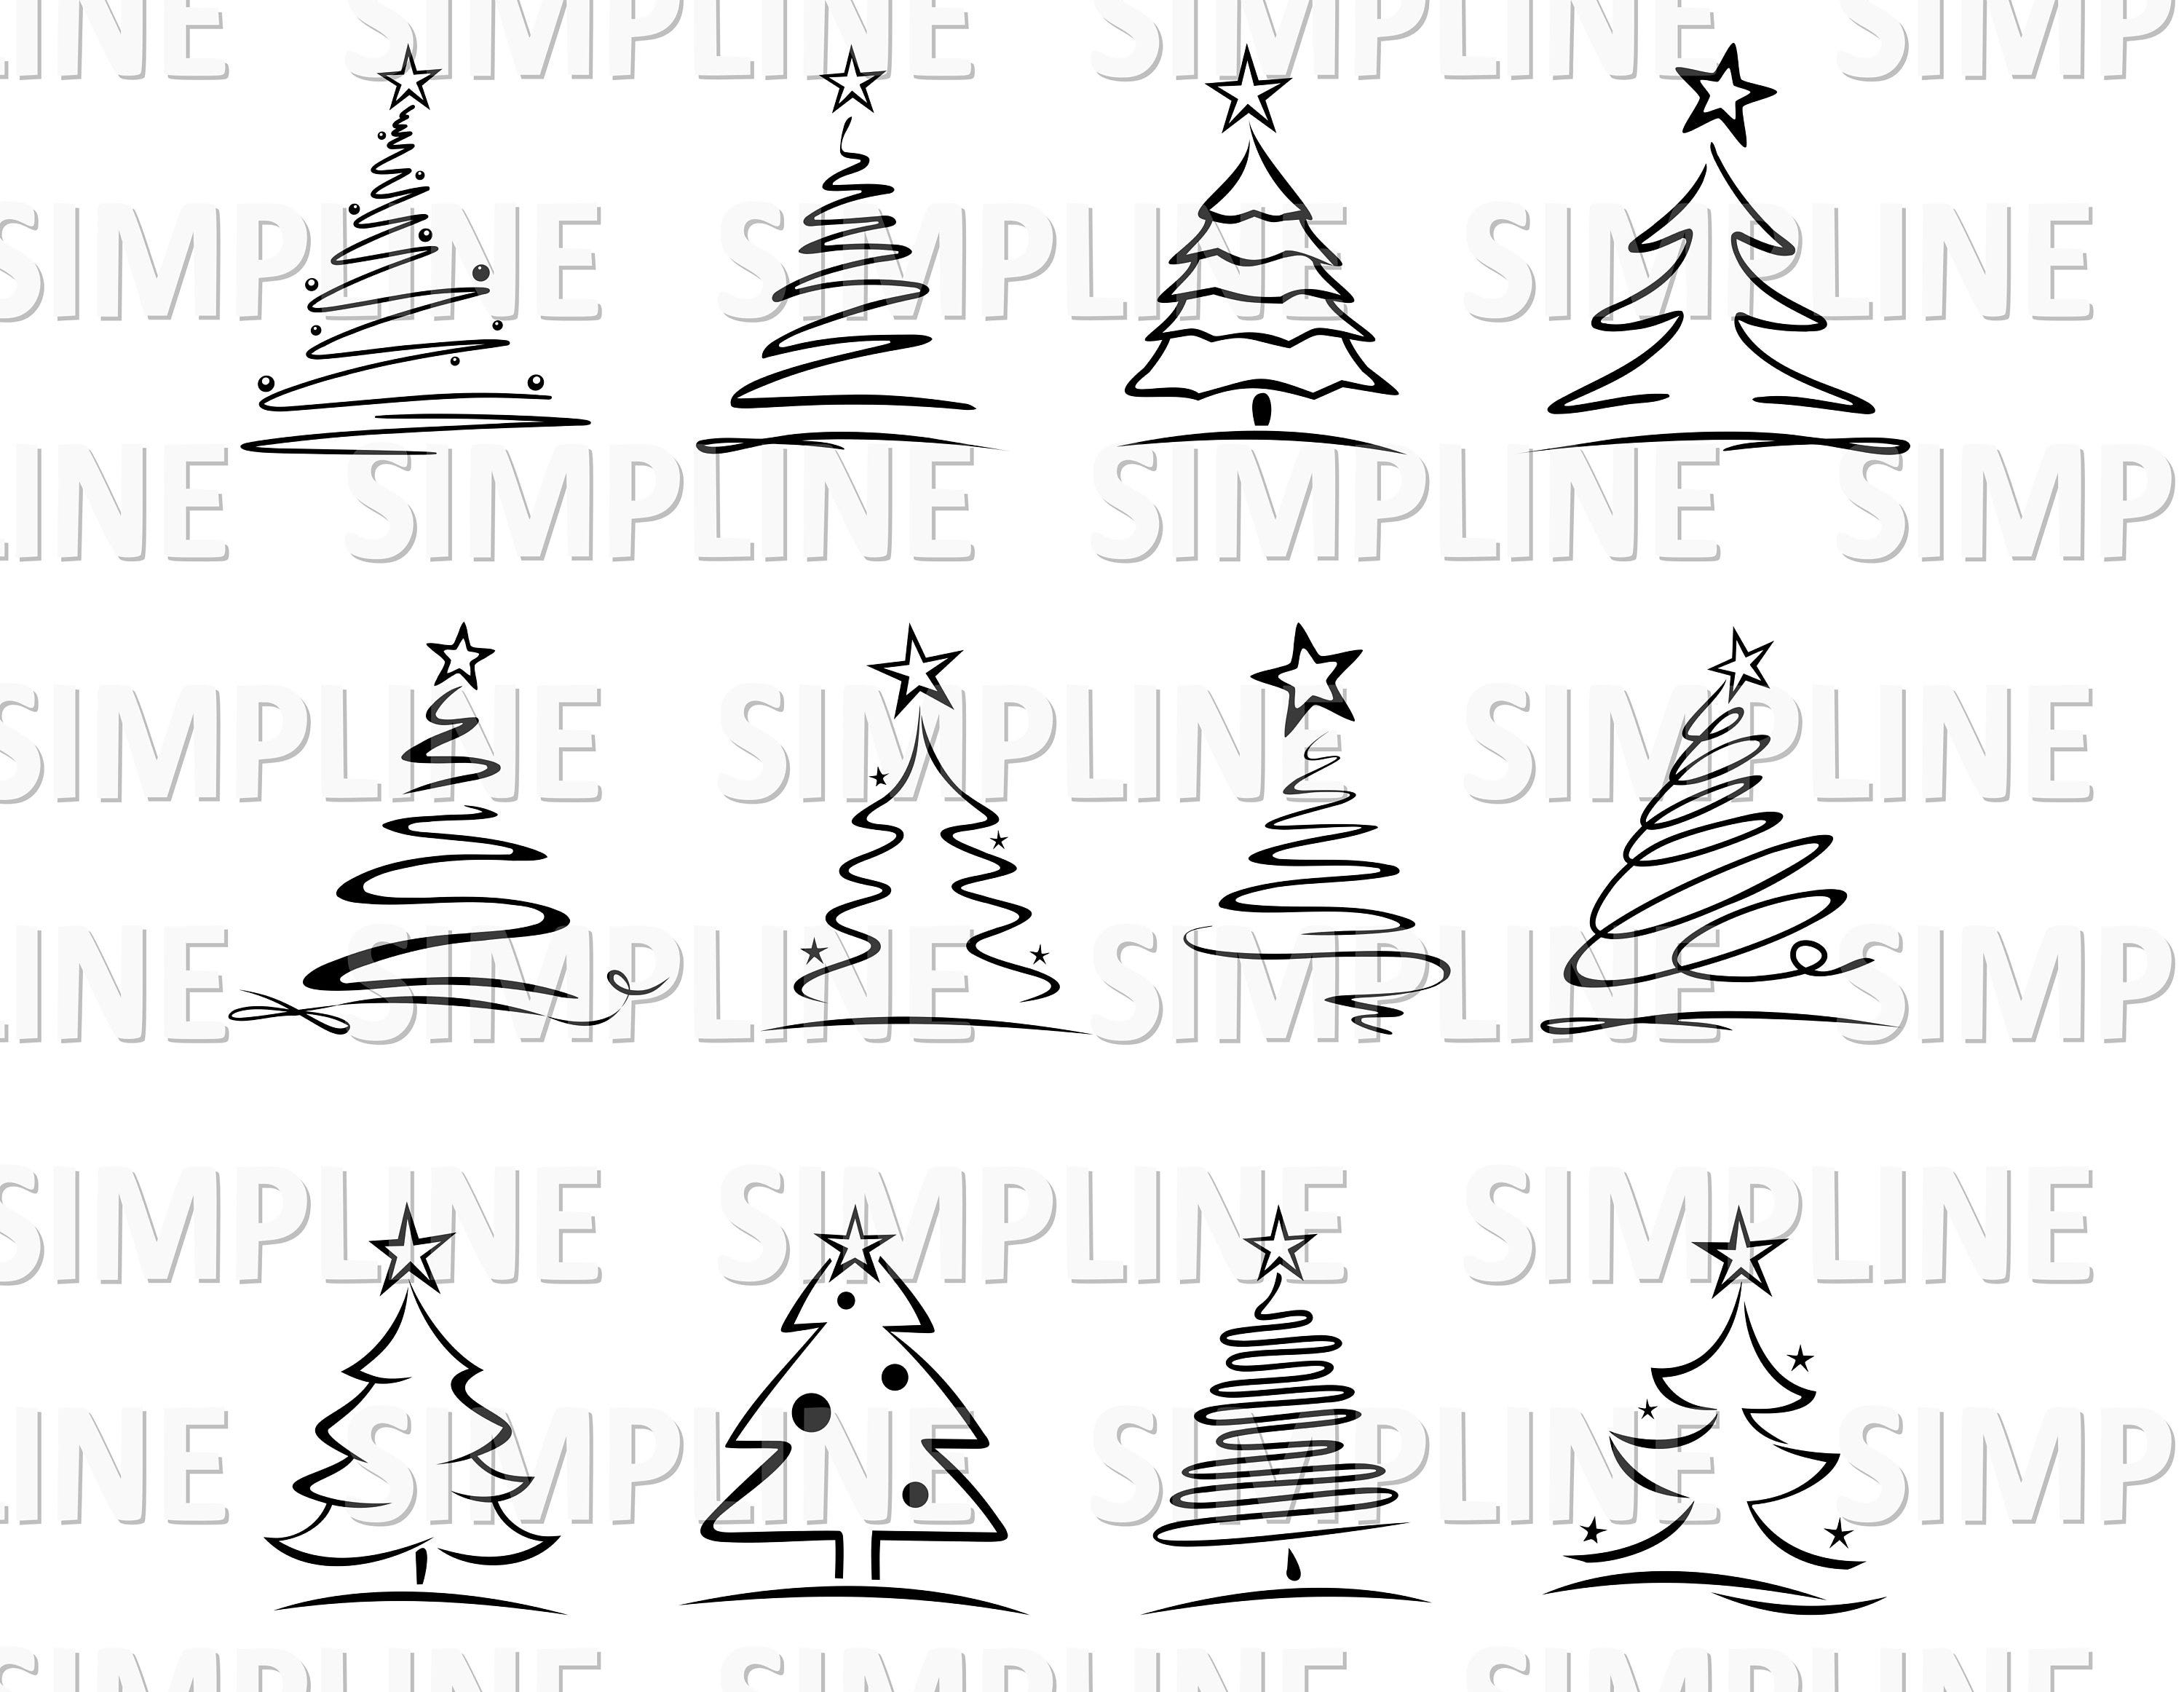 CHRISTMAS TREE Drawing TREE Set Silhouette Vector Graphic svg eps jpg png